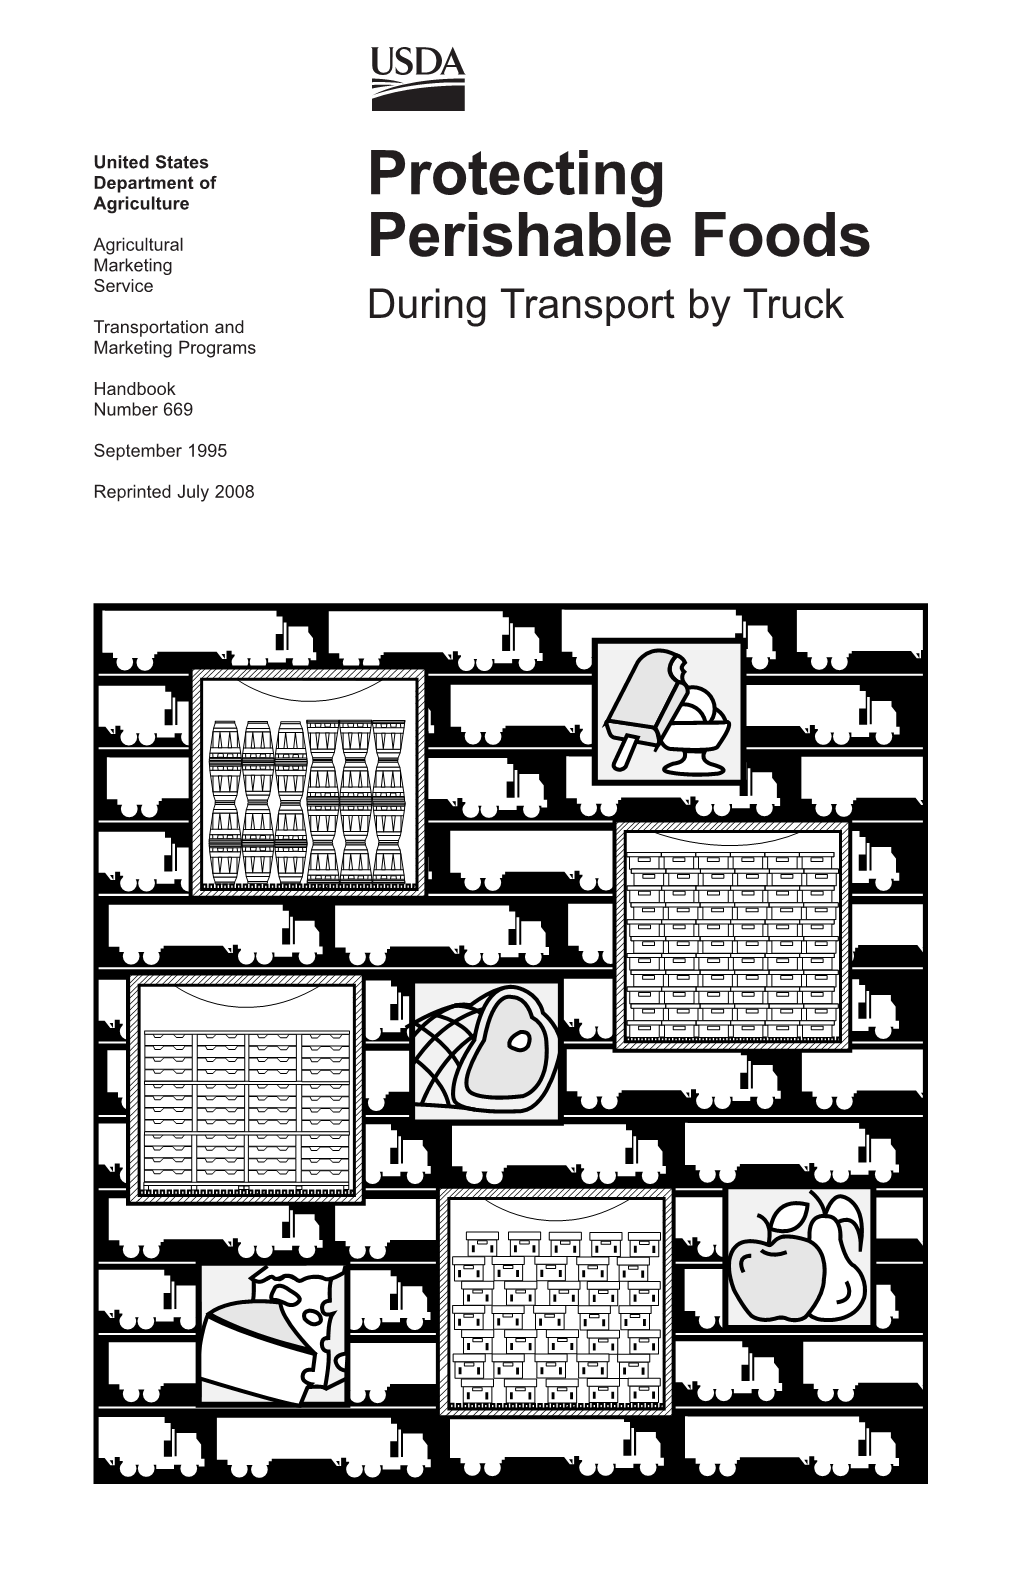 Protecting Perishable Foods During Transport by Truck by B